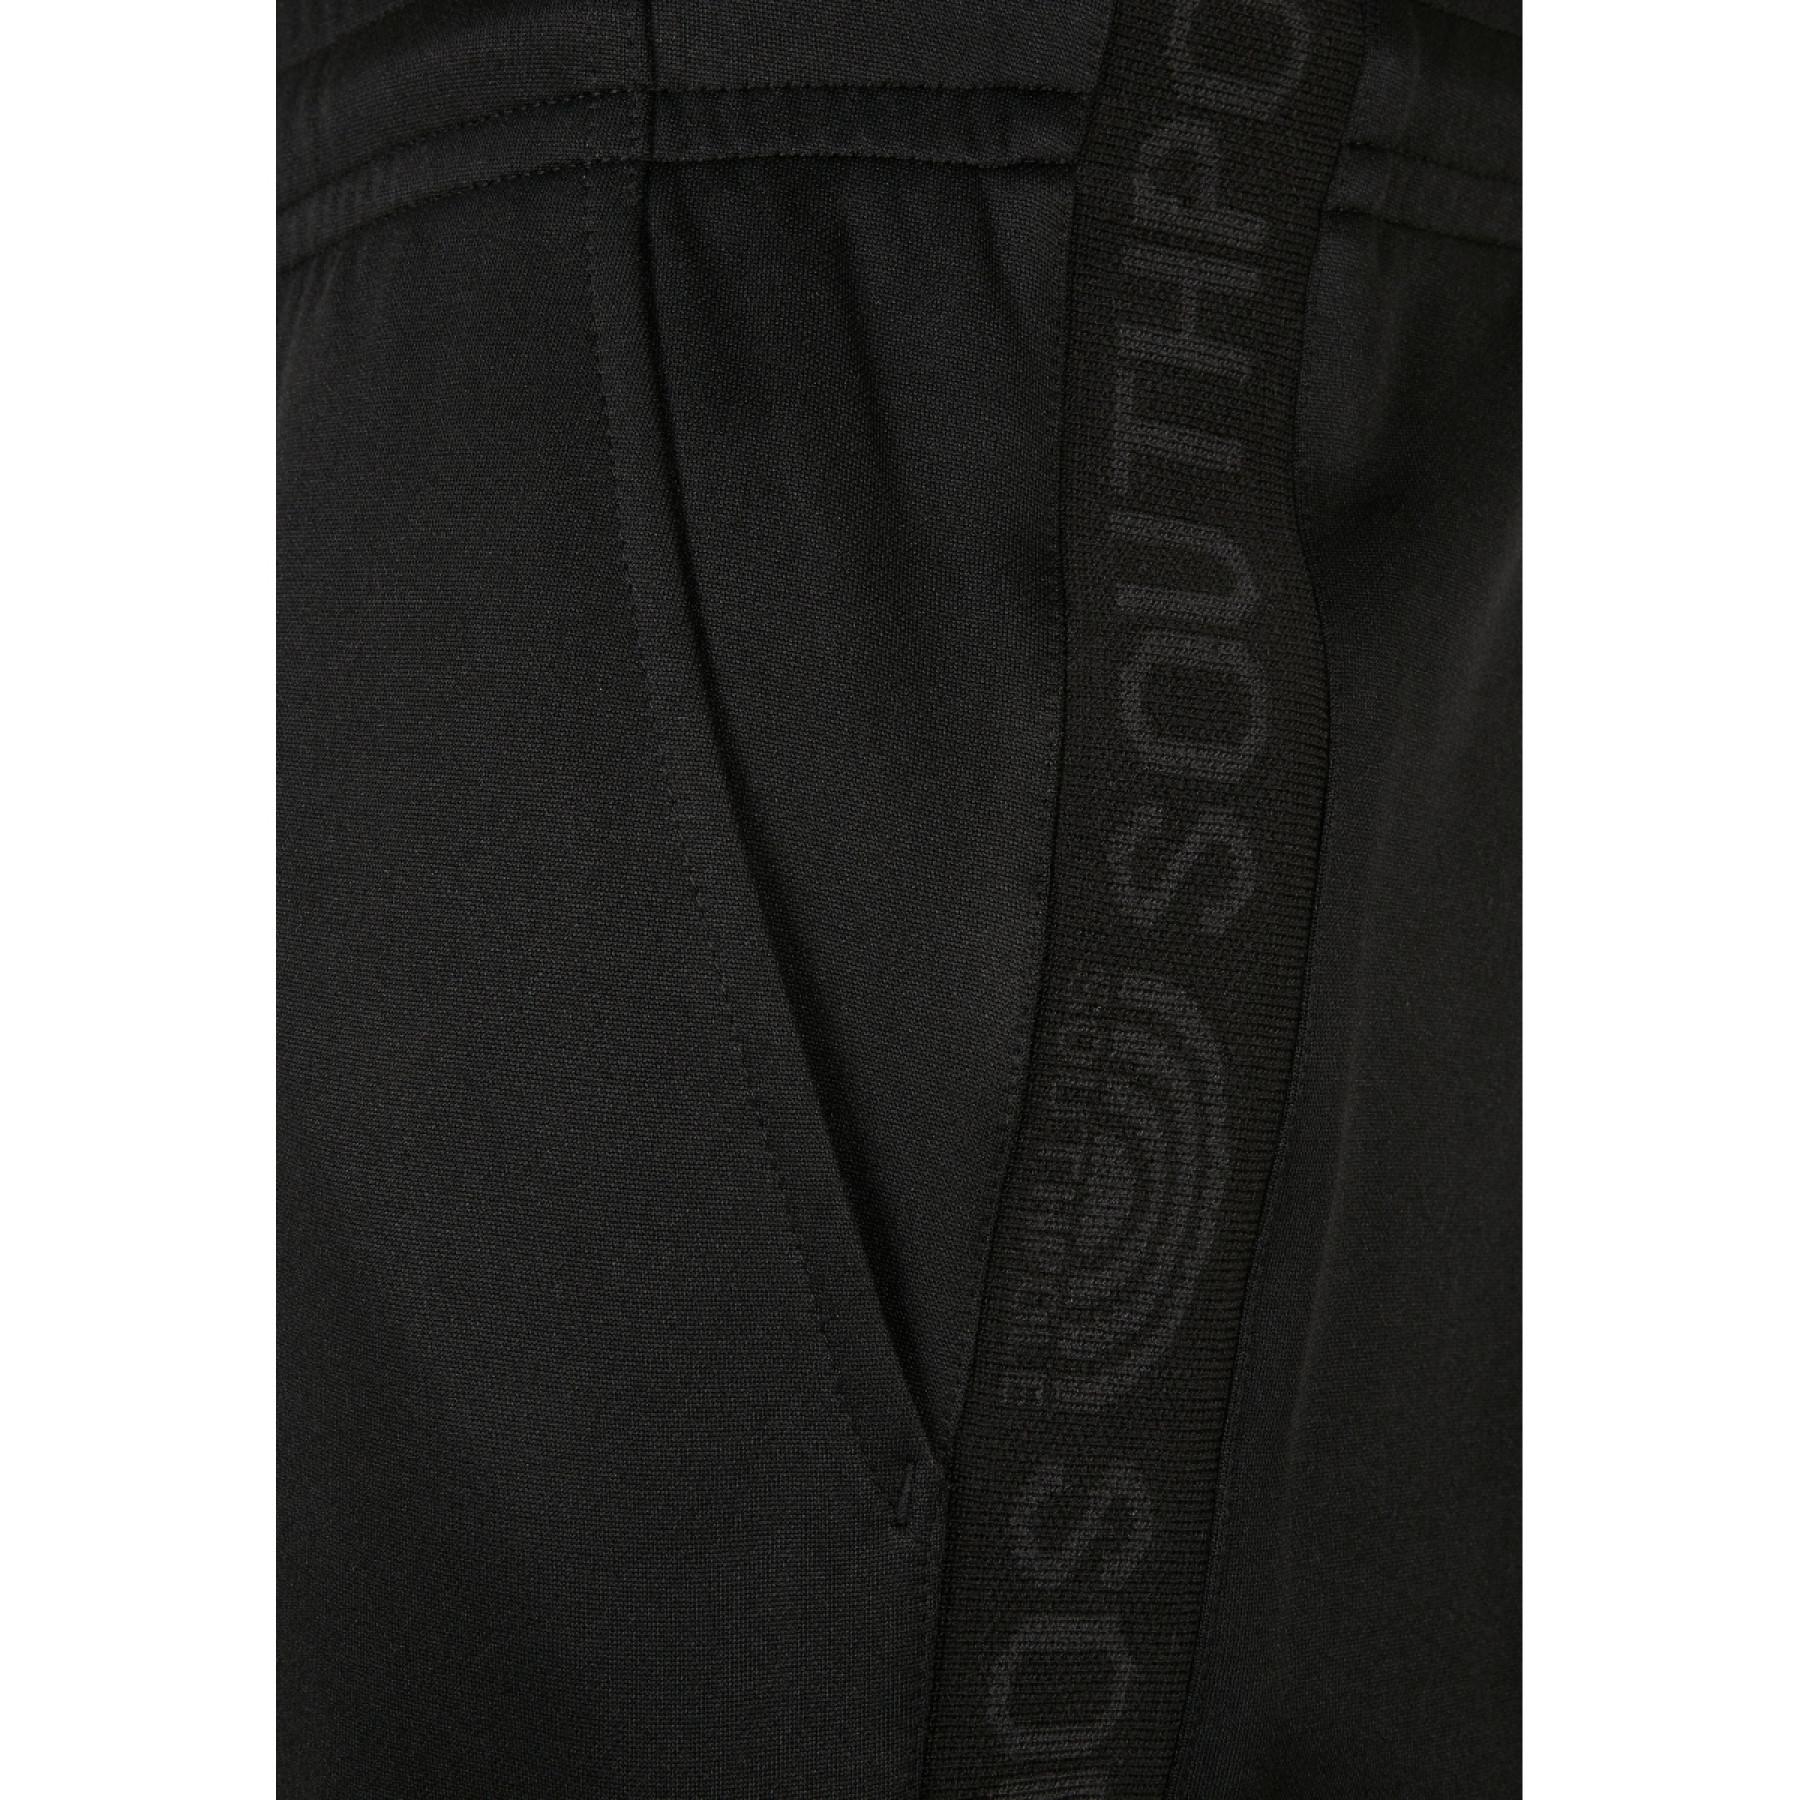 Hosen Southpole tricot with tape